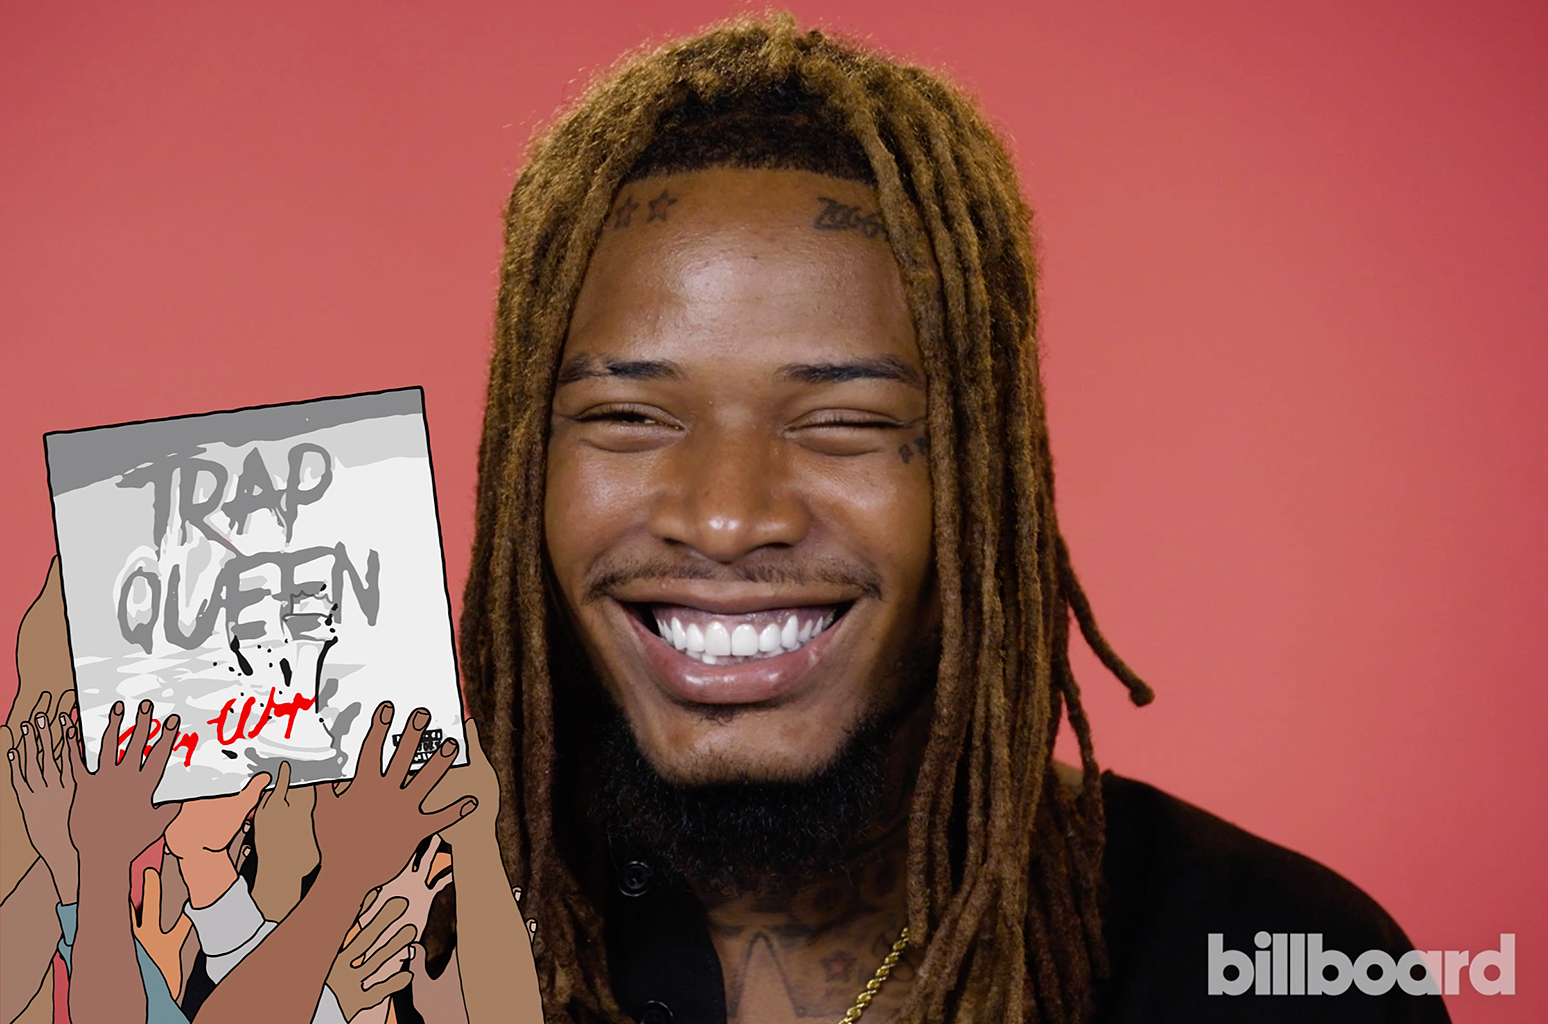 Fetty Wap Recalls the Cold Winter Day When He Sat on the Floor Writing 'Trap Queen'